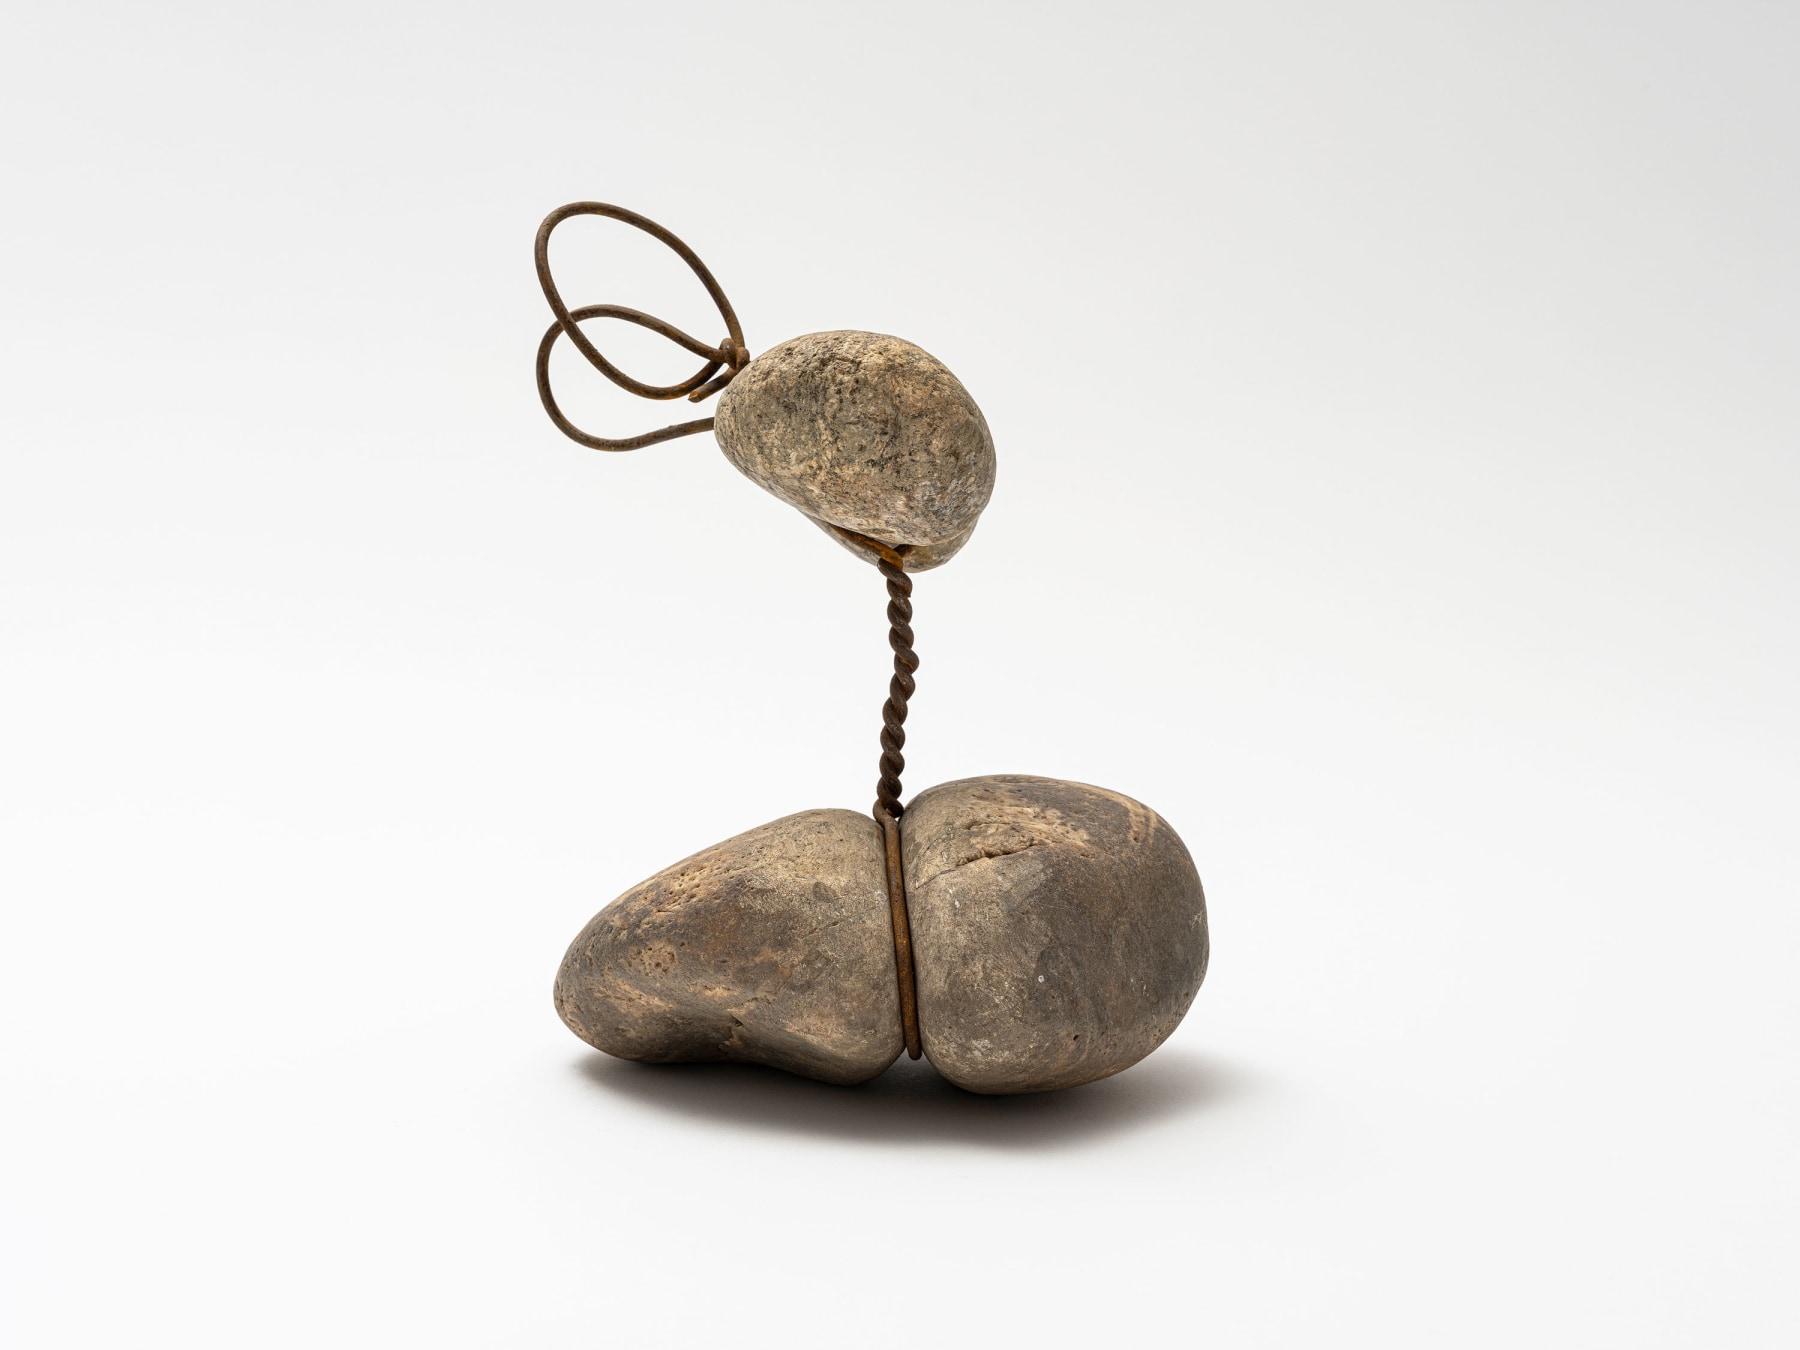 Seung-taek Lee

&amp;ldquo;Tied Stone&amp;rdquo;, 1996

Stone, wire

10 3/4 x 8 1/4 x 7 inches

27.5 x 21 x 18 cm

LEE 37

$35,000